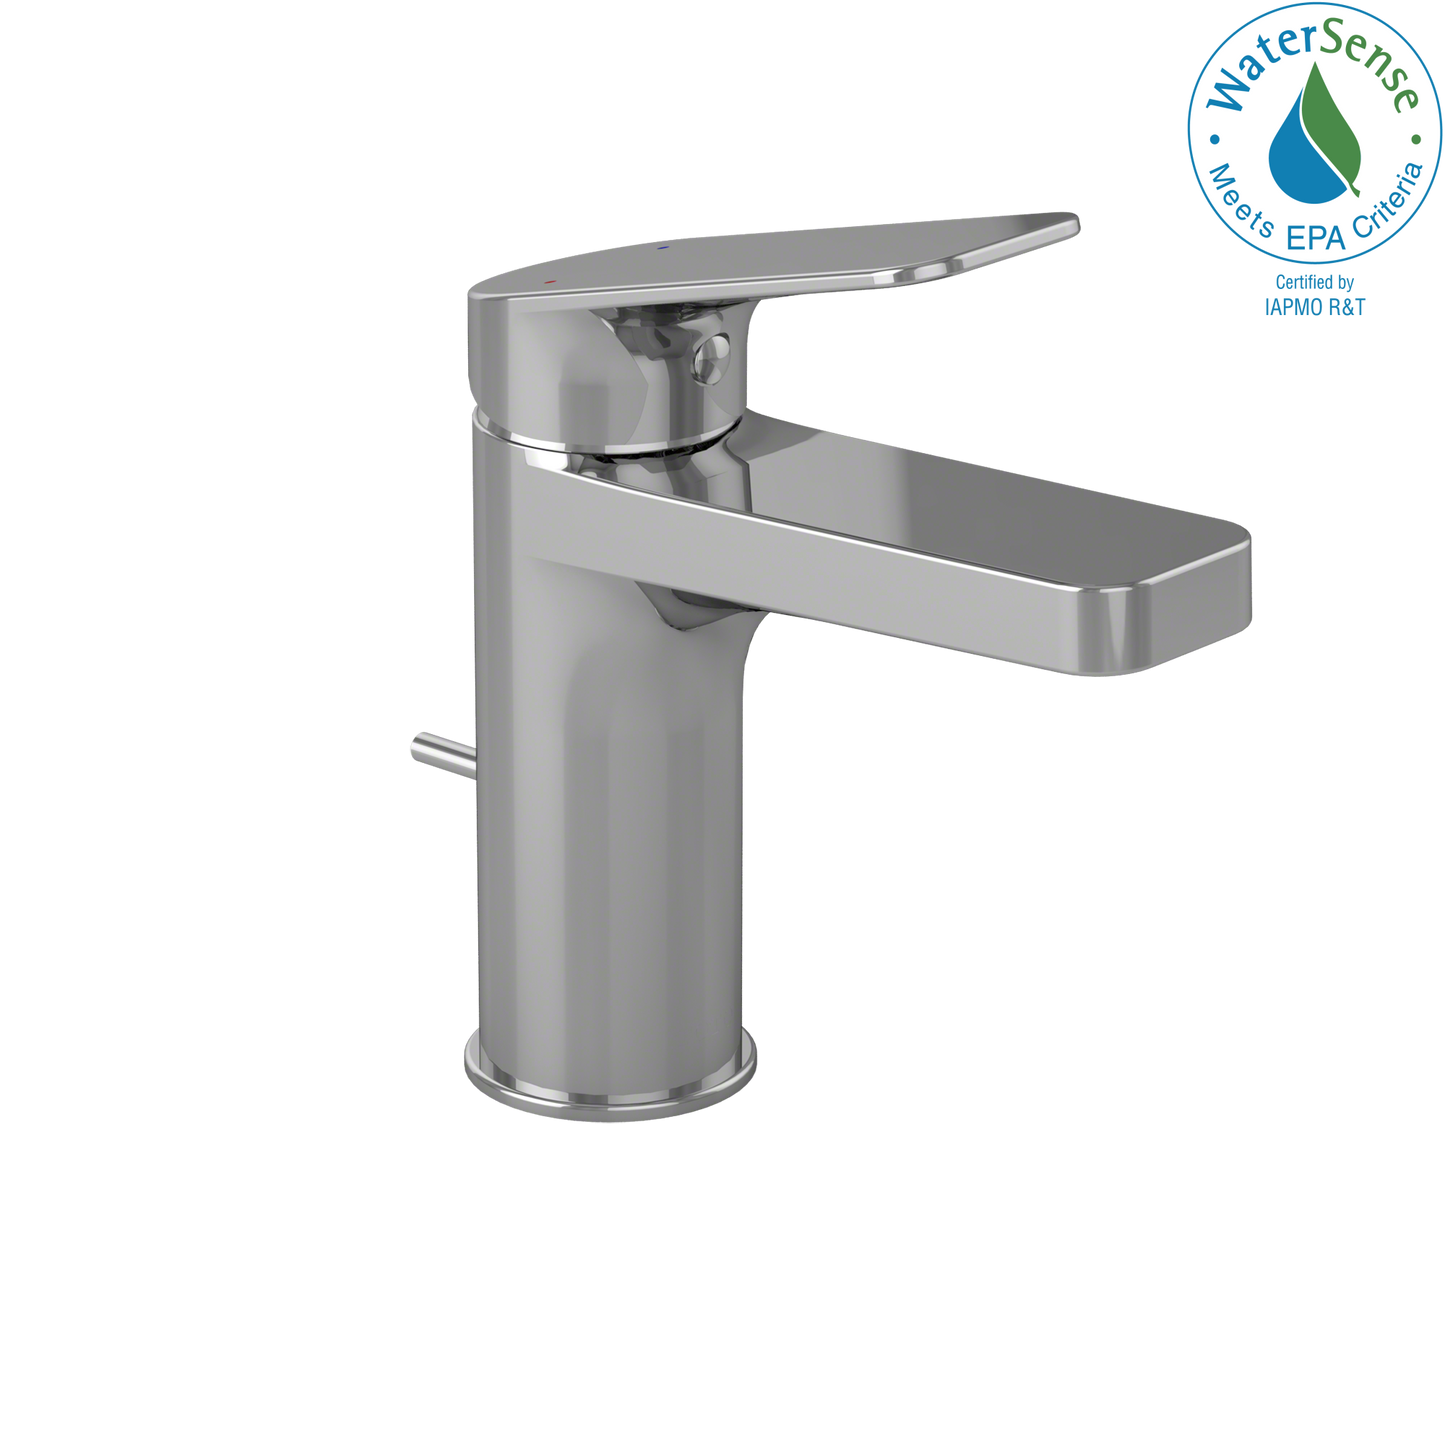 Toto TL363SD#CP - Oberon-S - Single Hole Single Handle Deck Mount Bathroom Faucet with Low Flow